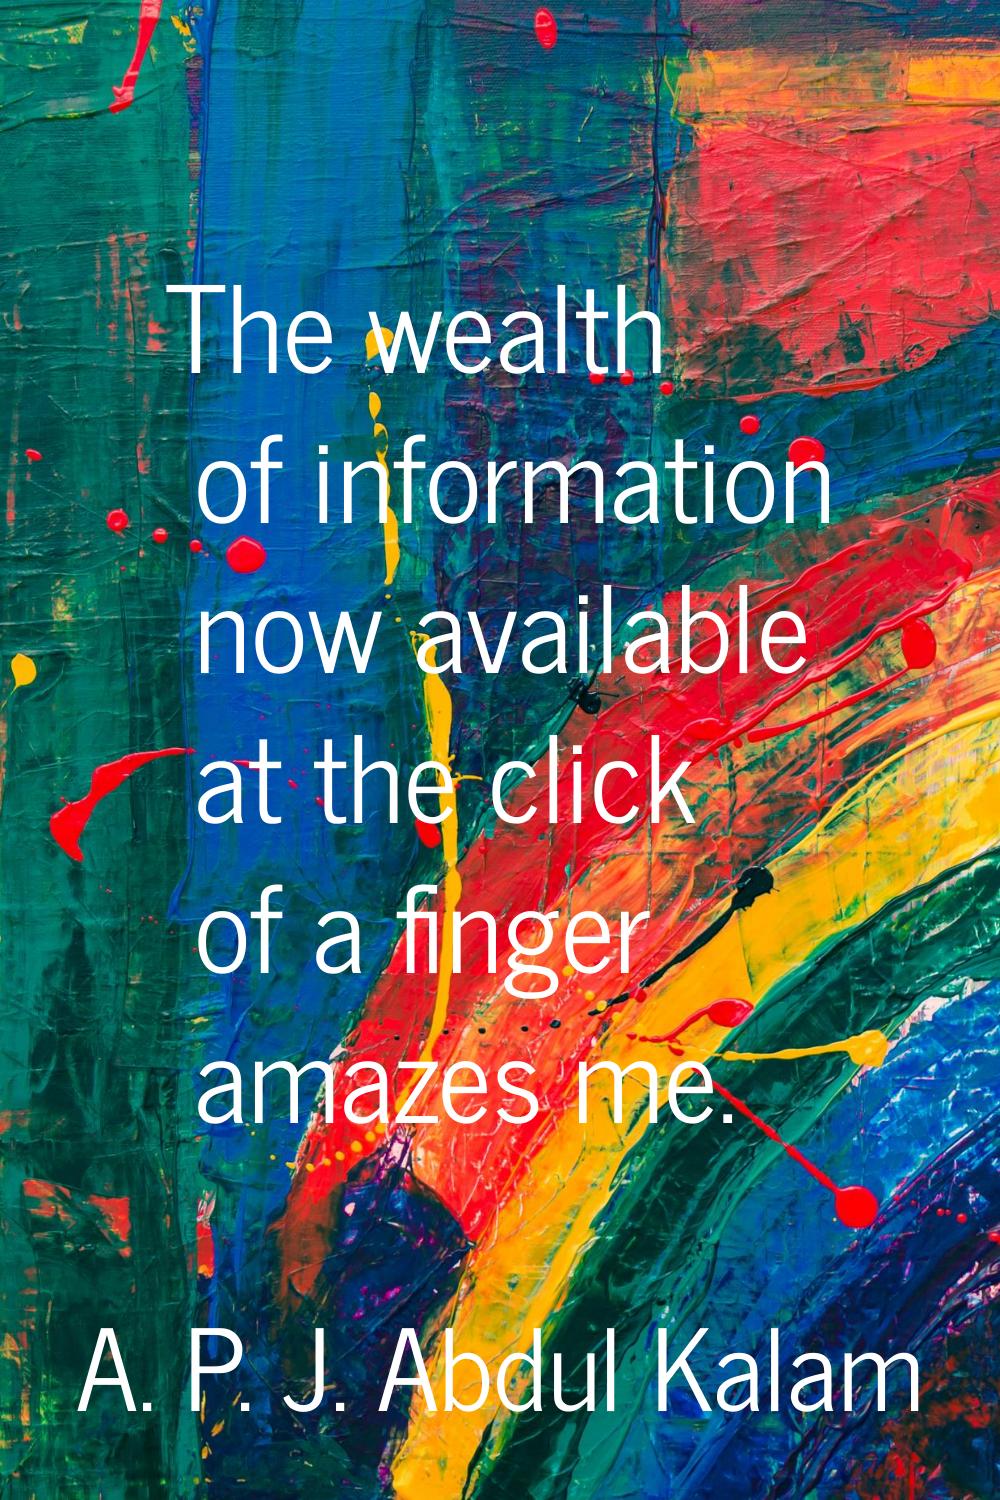 The wealth of information now available at the click of a finger amazes me.